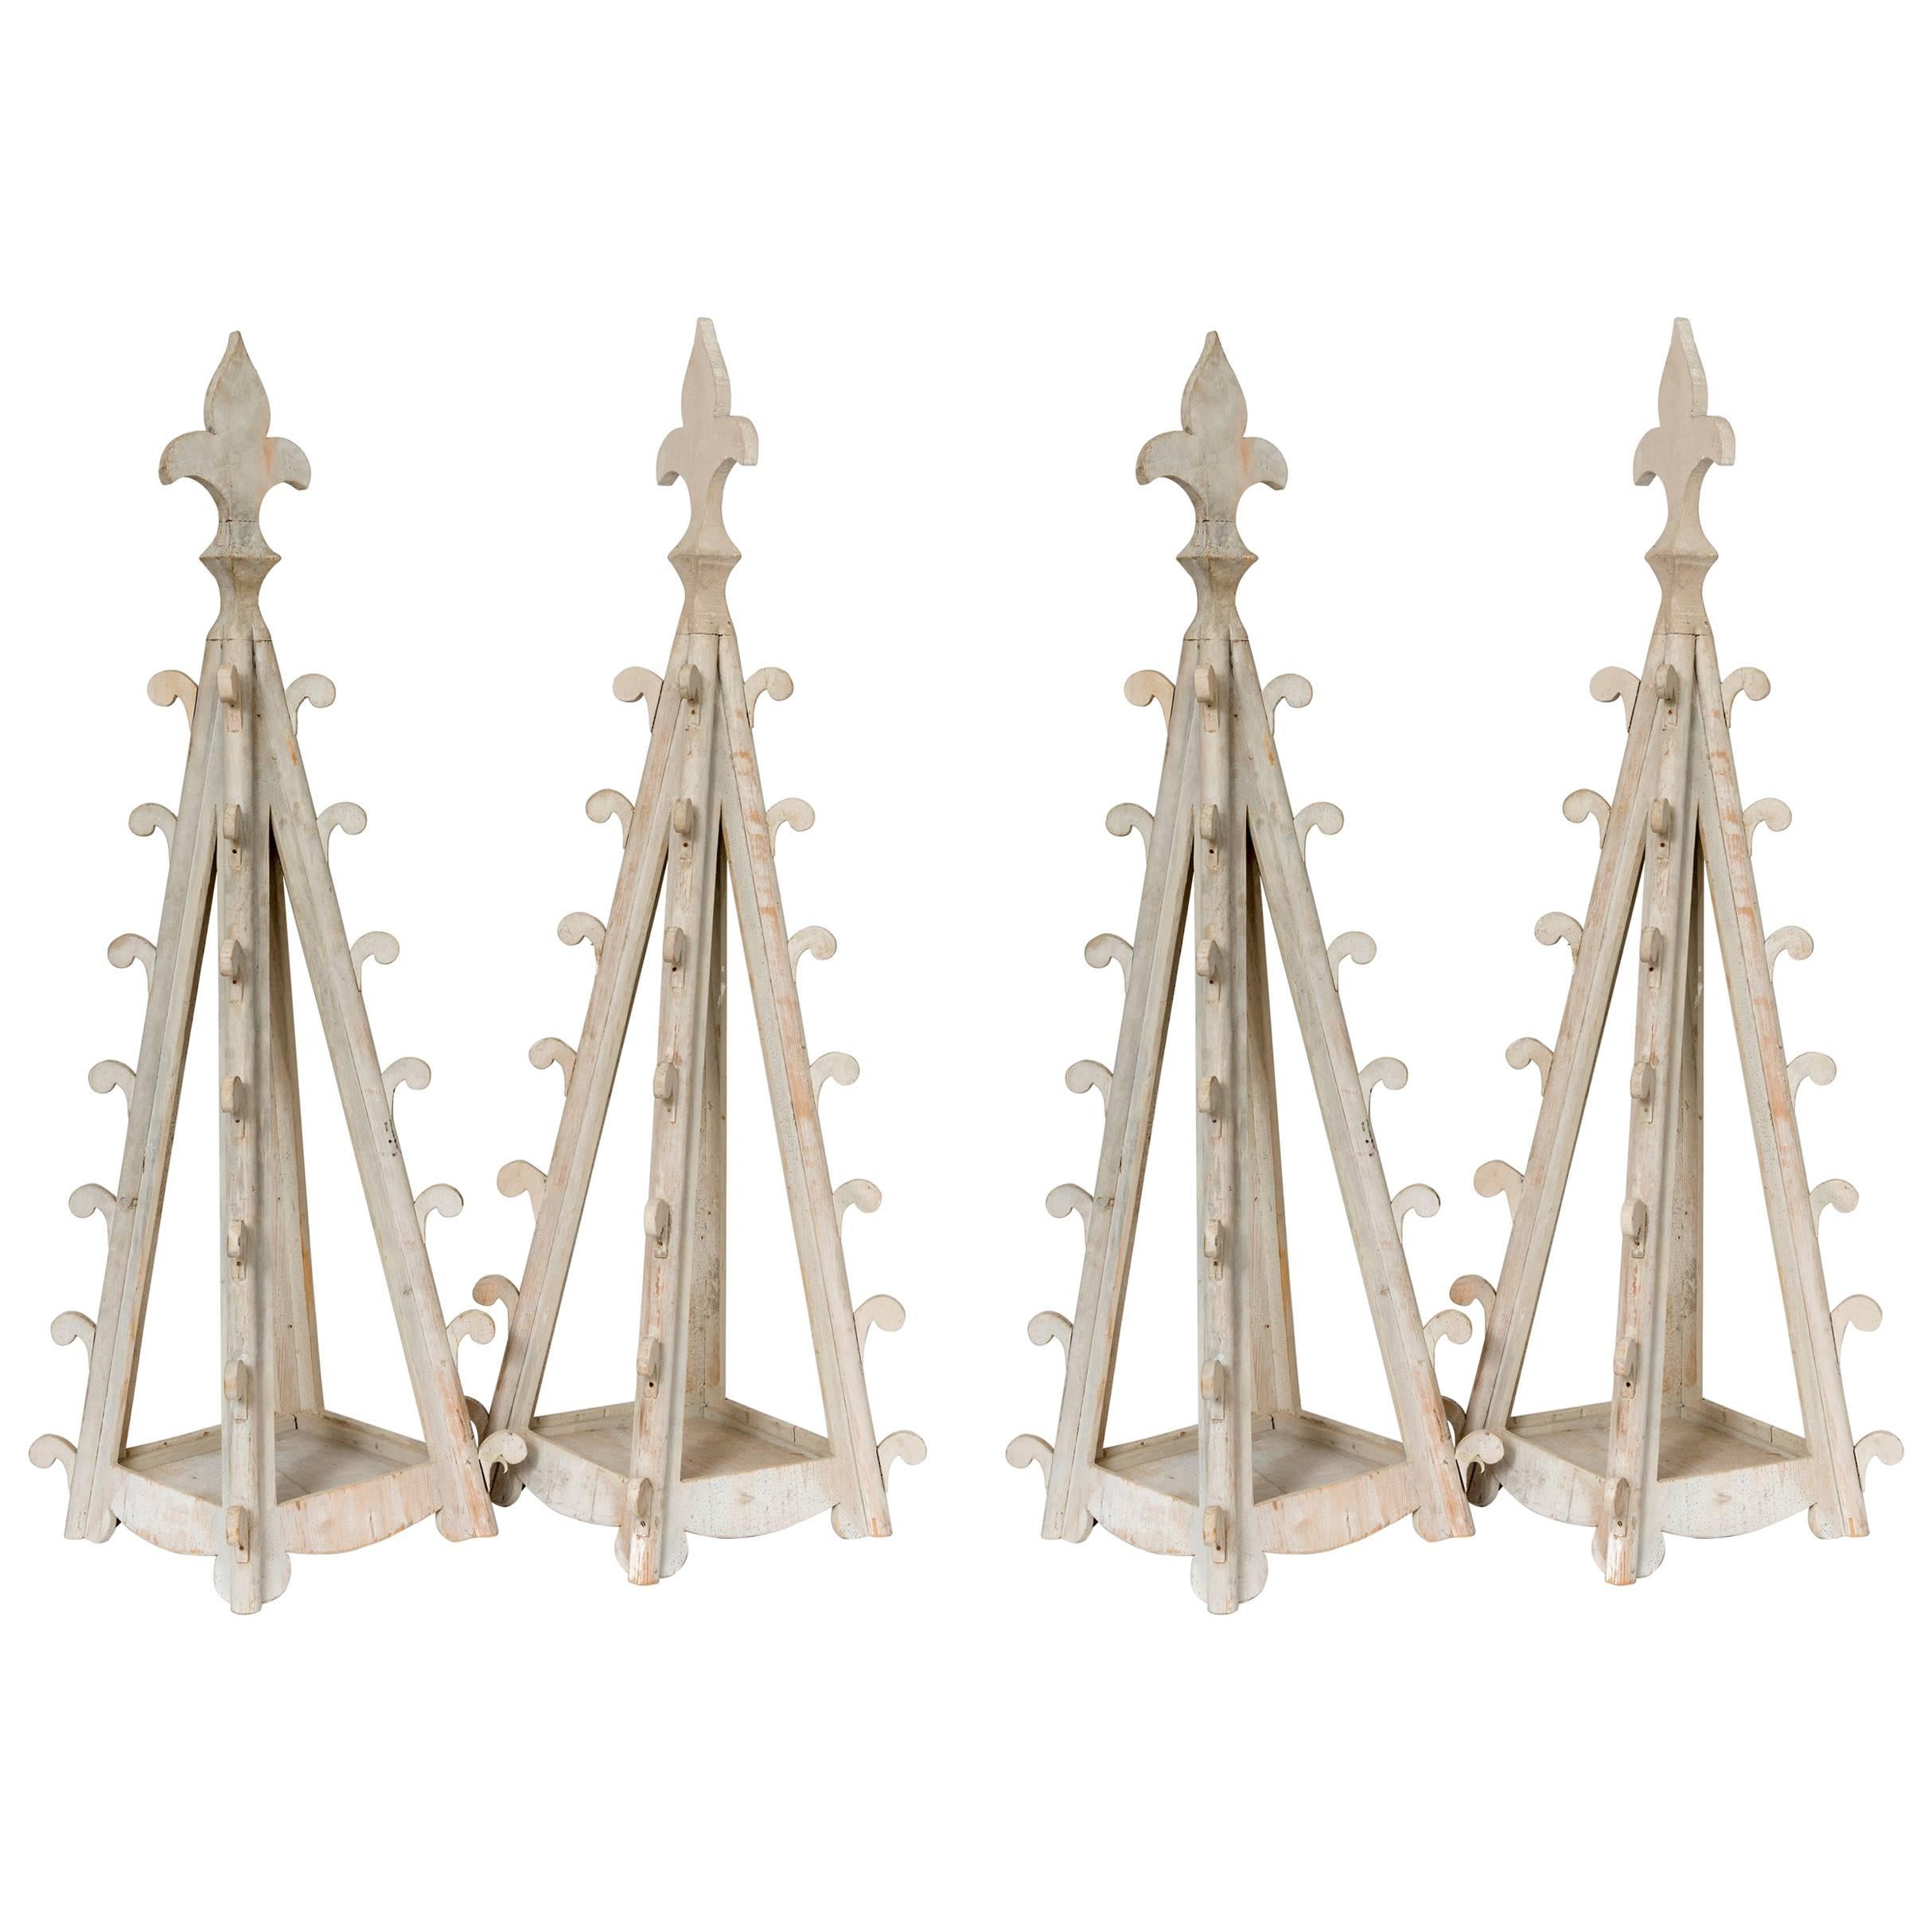 Two Pairs of Gothic Wooden Table Candleholders For Sale